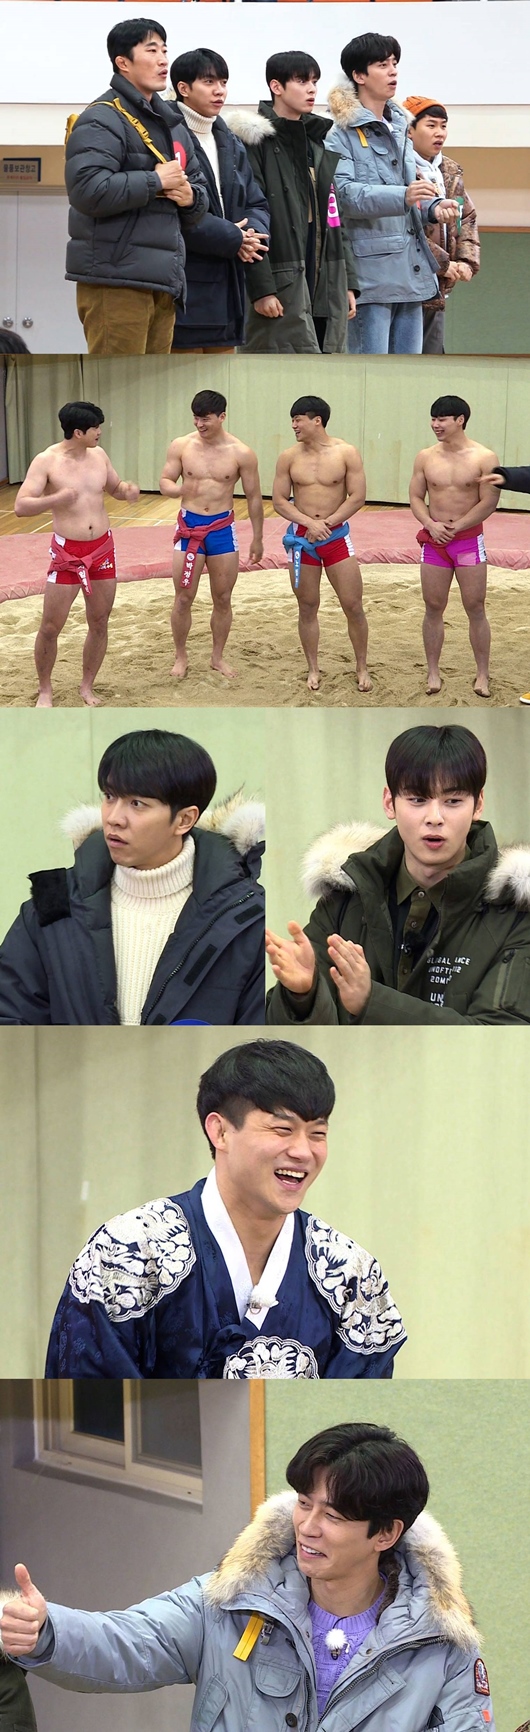 SBS All The Butlers, which will be broadcast on January 24, is decorated with Wrestle Special, which is a full-fledged idol of Wrestle.The show will feature a brilliant lineup of athletes from Lim Tae-hyuk, Wrestle Group 1 player, Park Jung-woo, All-round player Noh Bum-soo, and Heo Sun-haeng, the youngest Taebaek Changsha in the 2000s.They are interested in telling the members that they have passed on the true taste of Wrestle.The athletes are said to have shown off their artistic sense that they do not lose to their members as well as their Wrestle skills.Lee Seung-gi said, Park Jung-woo has the nickname of David of Wrestle, referring to the Wrestle promotional video that caused a big topic with the sculptural body of the players.Park Jung-woo showed a modest response as if he were embarrassed, and Lim Tae-hyuk was proud of his hot-tempered demeanor, revealing that he likes to take off (Park Jung-woo) as he confronts his humility.The limited-edition artistic sense of the F4 on the sand Handsome guy Wrestle athletes can be found on SBS All The Butlers which is broadcasted at 6:25 pm on the 24th./[Photo] SBS